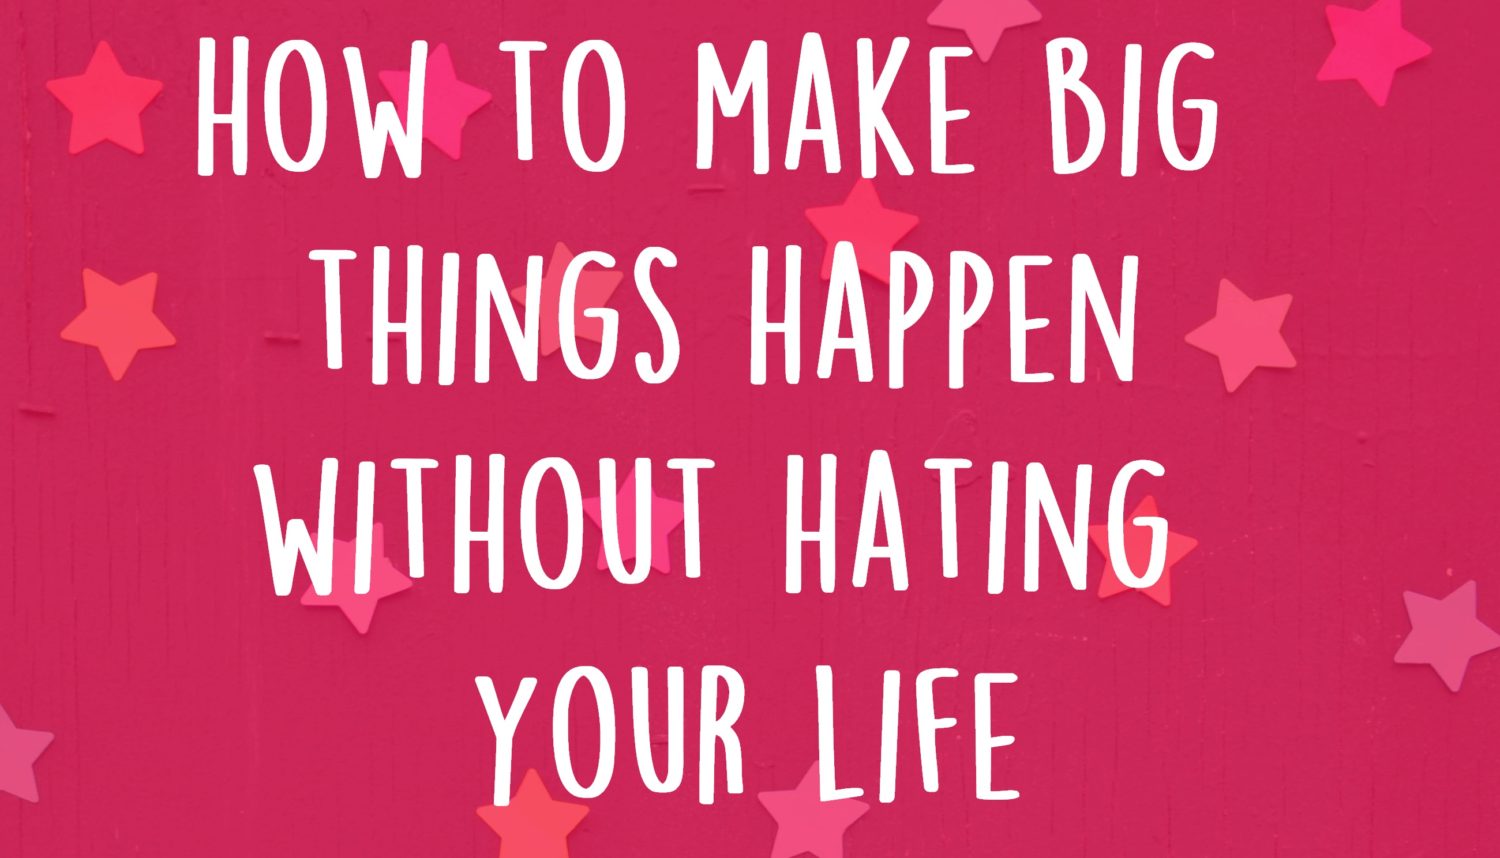 Make Big Things Happen Without Hating Your Life | Uncustomary